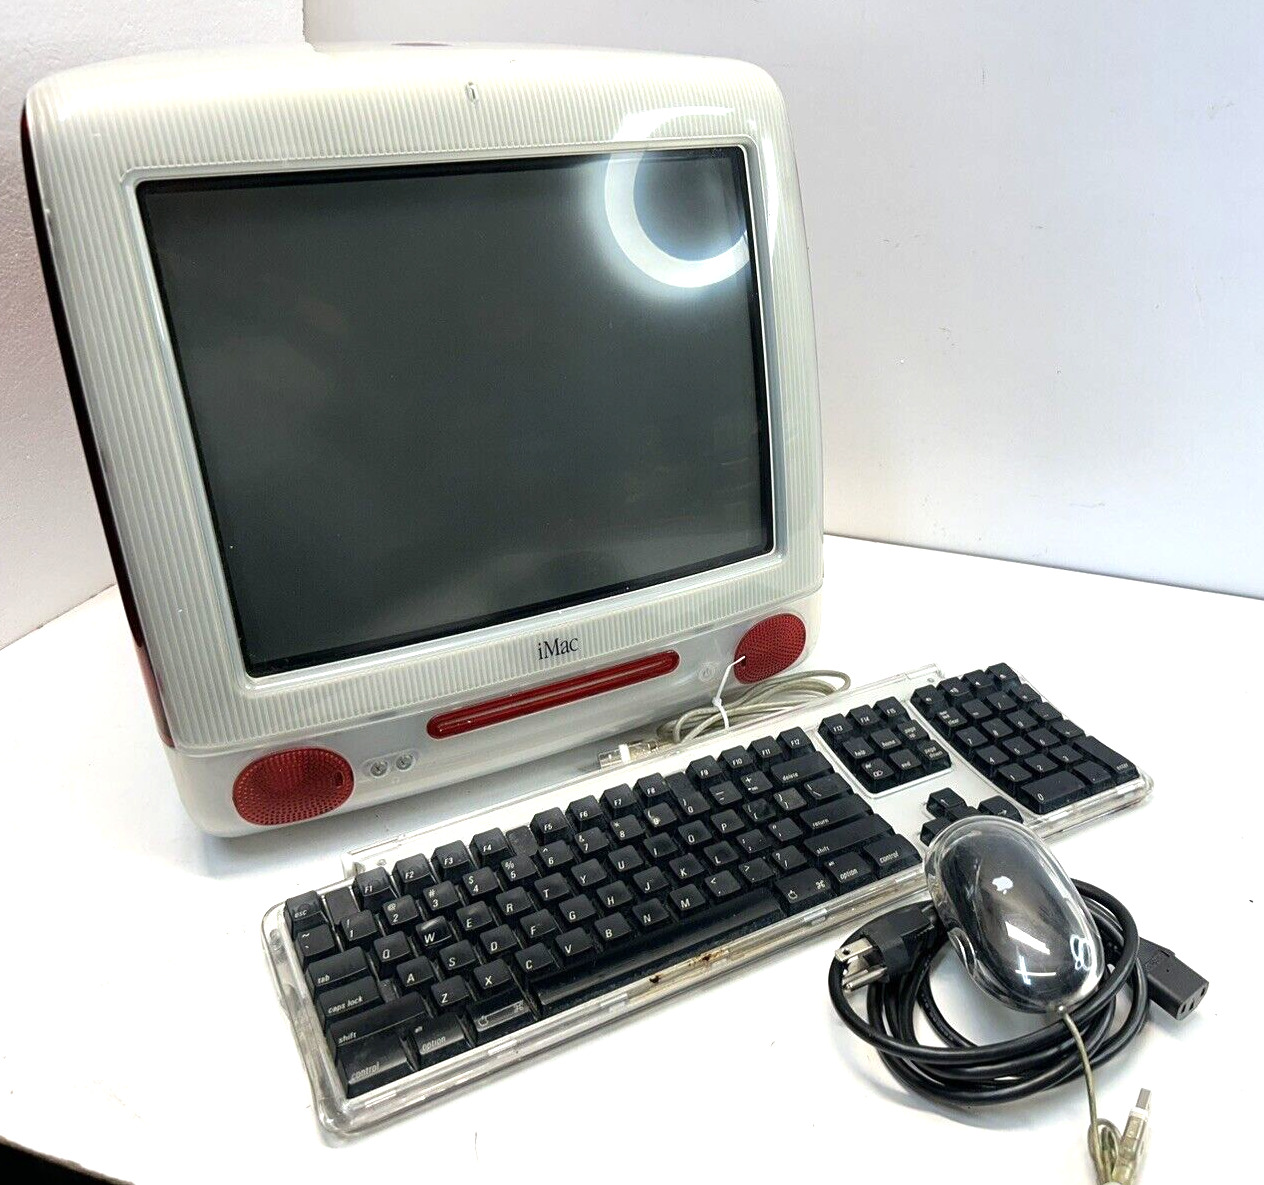 Apple iMac G3 Red Computer w/Keyboard & Mouse Vintage 2000